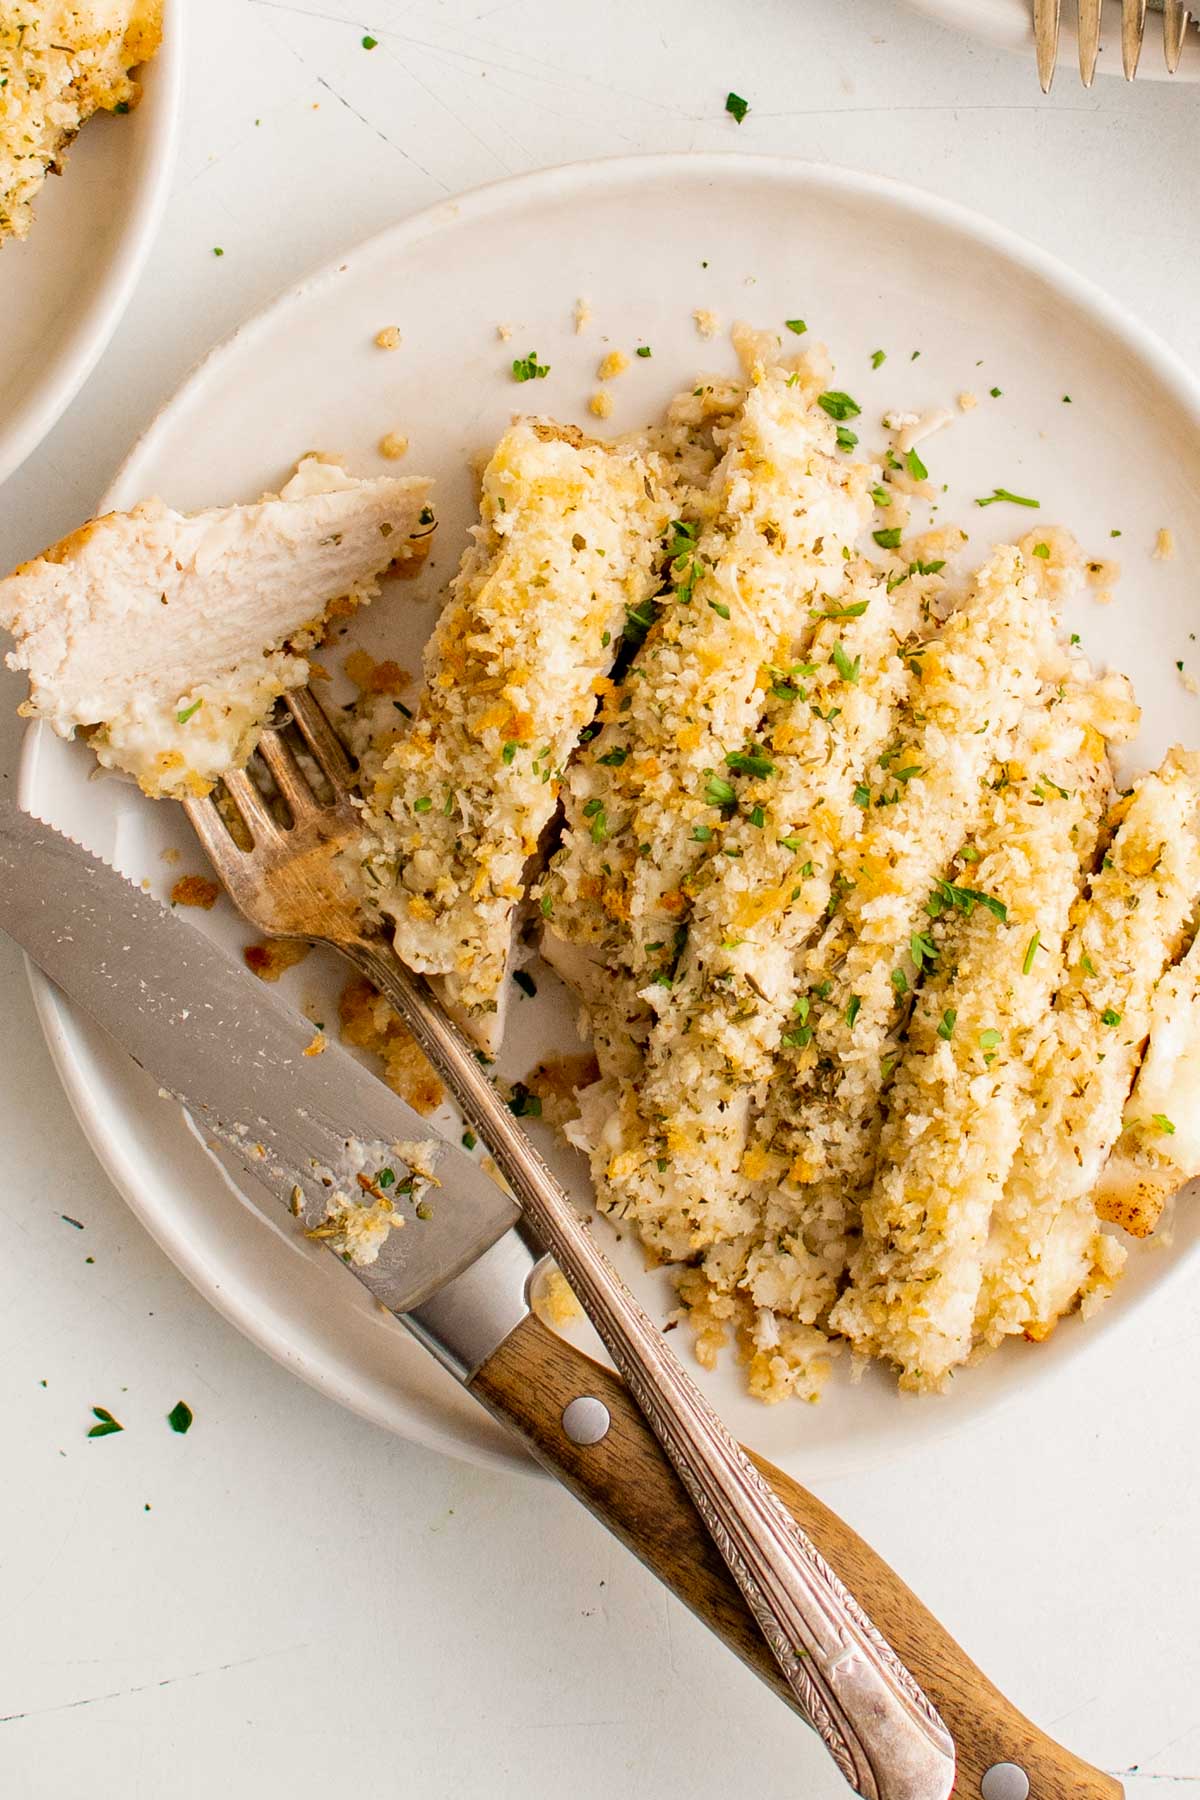 Sliced chicken breast on a white plate with breadcrumbs, a fork and knife.